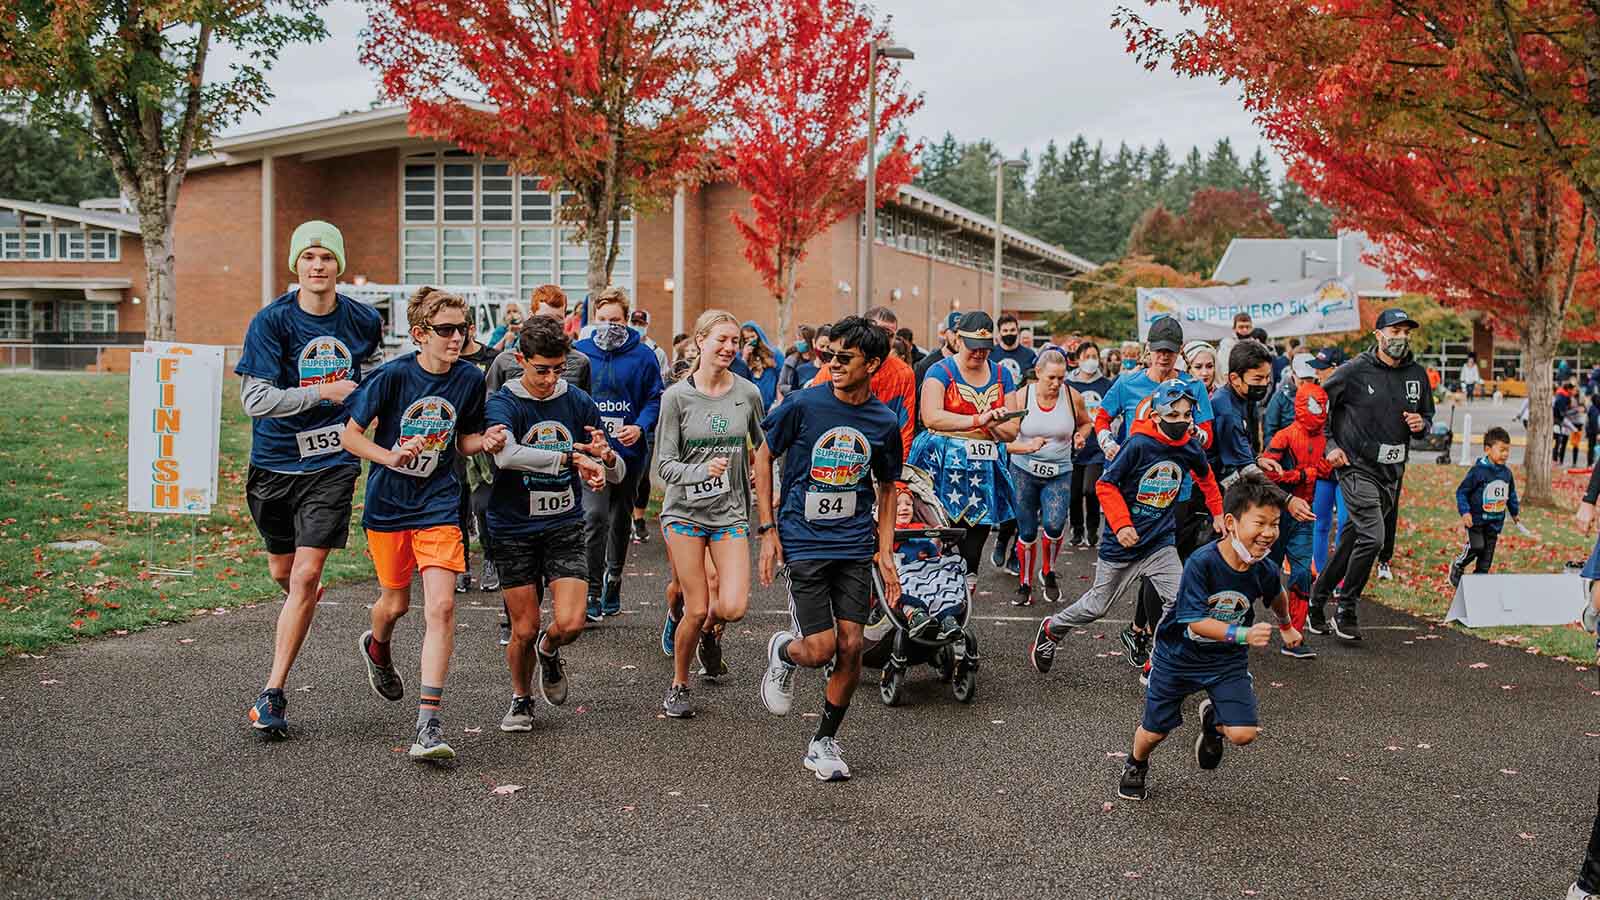 Runnners of all ages running from the starting line at the Superhero 5K surrounded by trees with red and orange fall leaves.